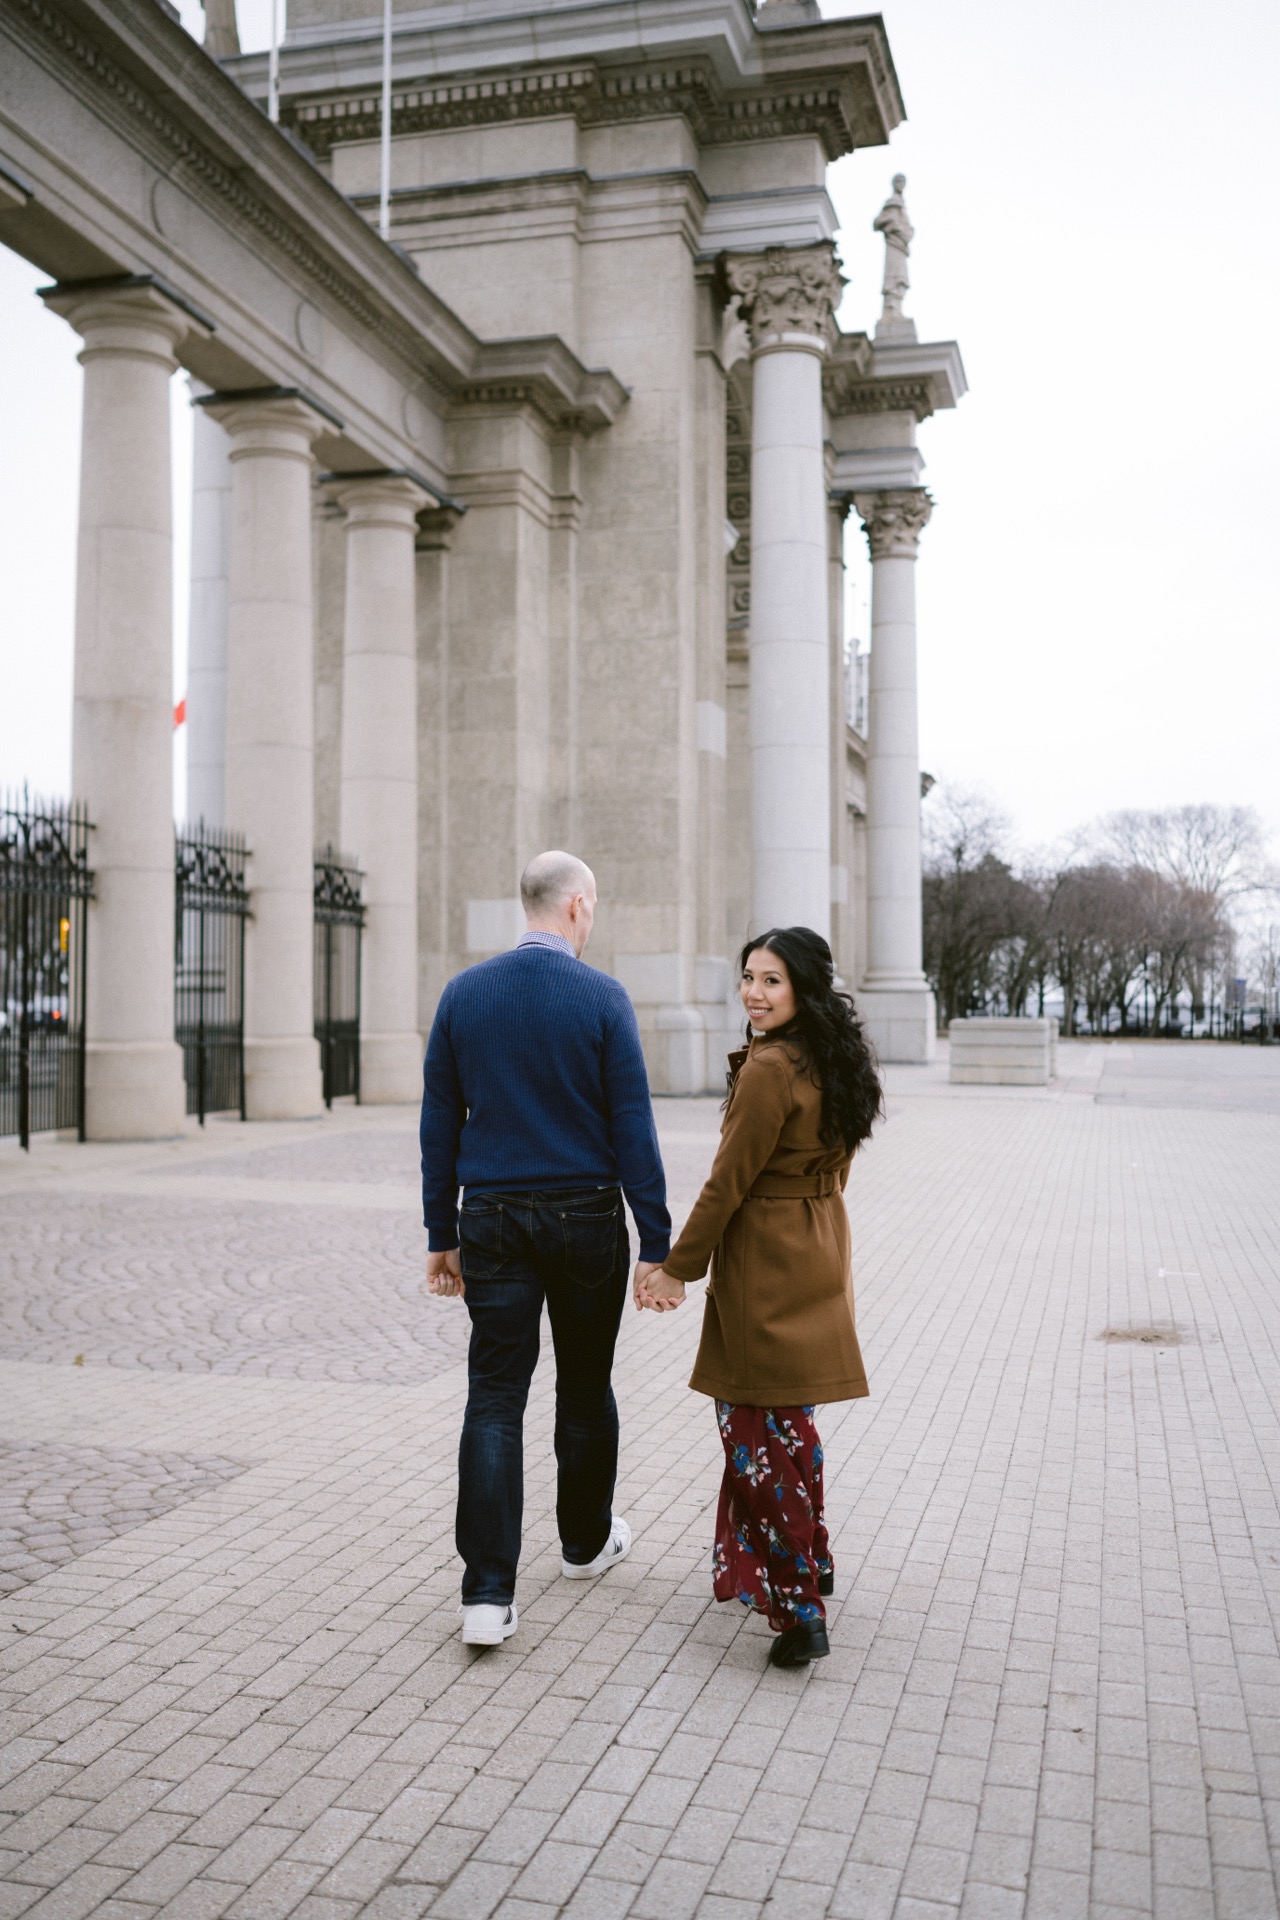 A couple holding hands while walking away on a paved area near a large building with columns.